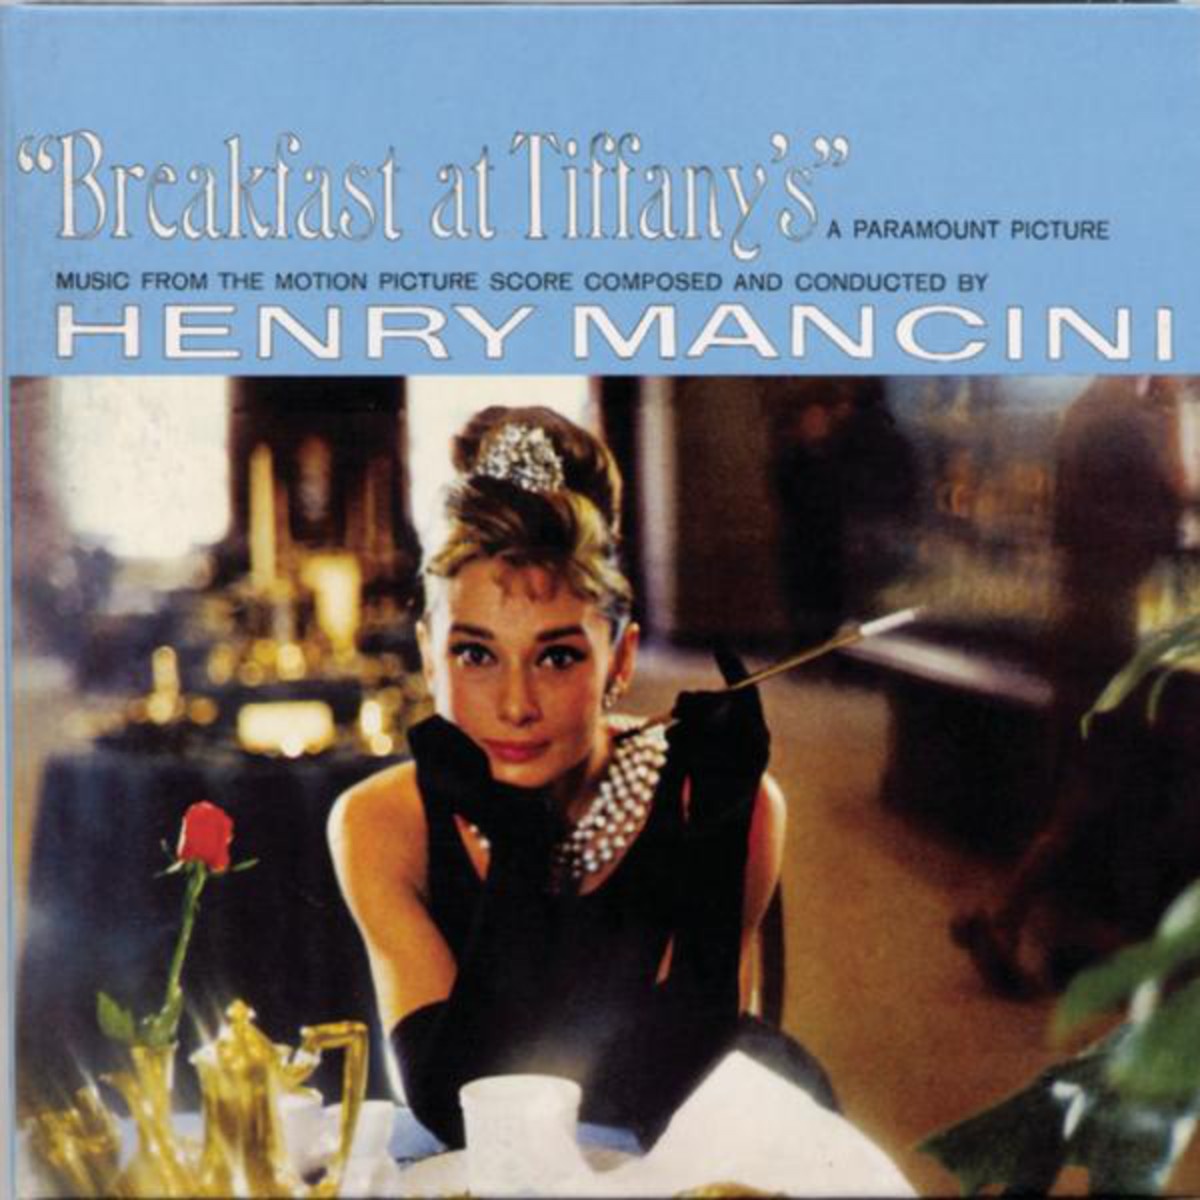 Breakfast at Tiffany's (Music from the Motion Picture)